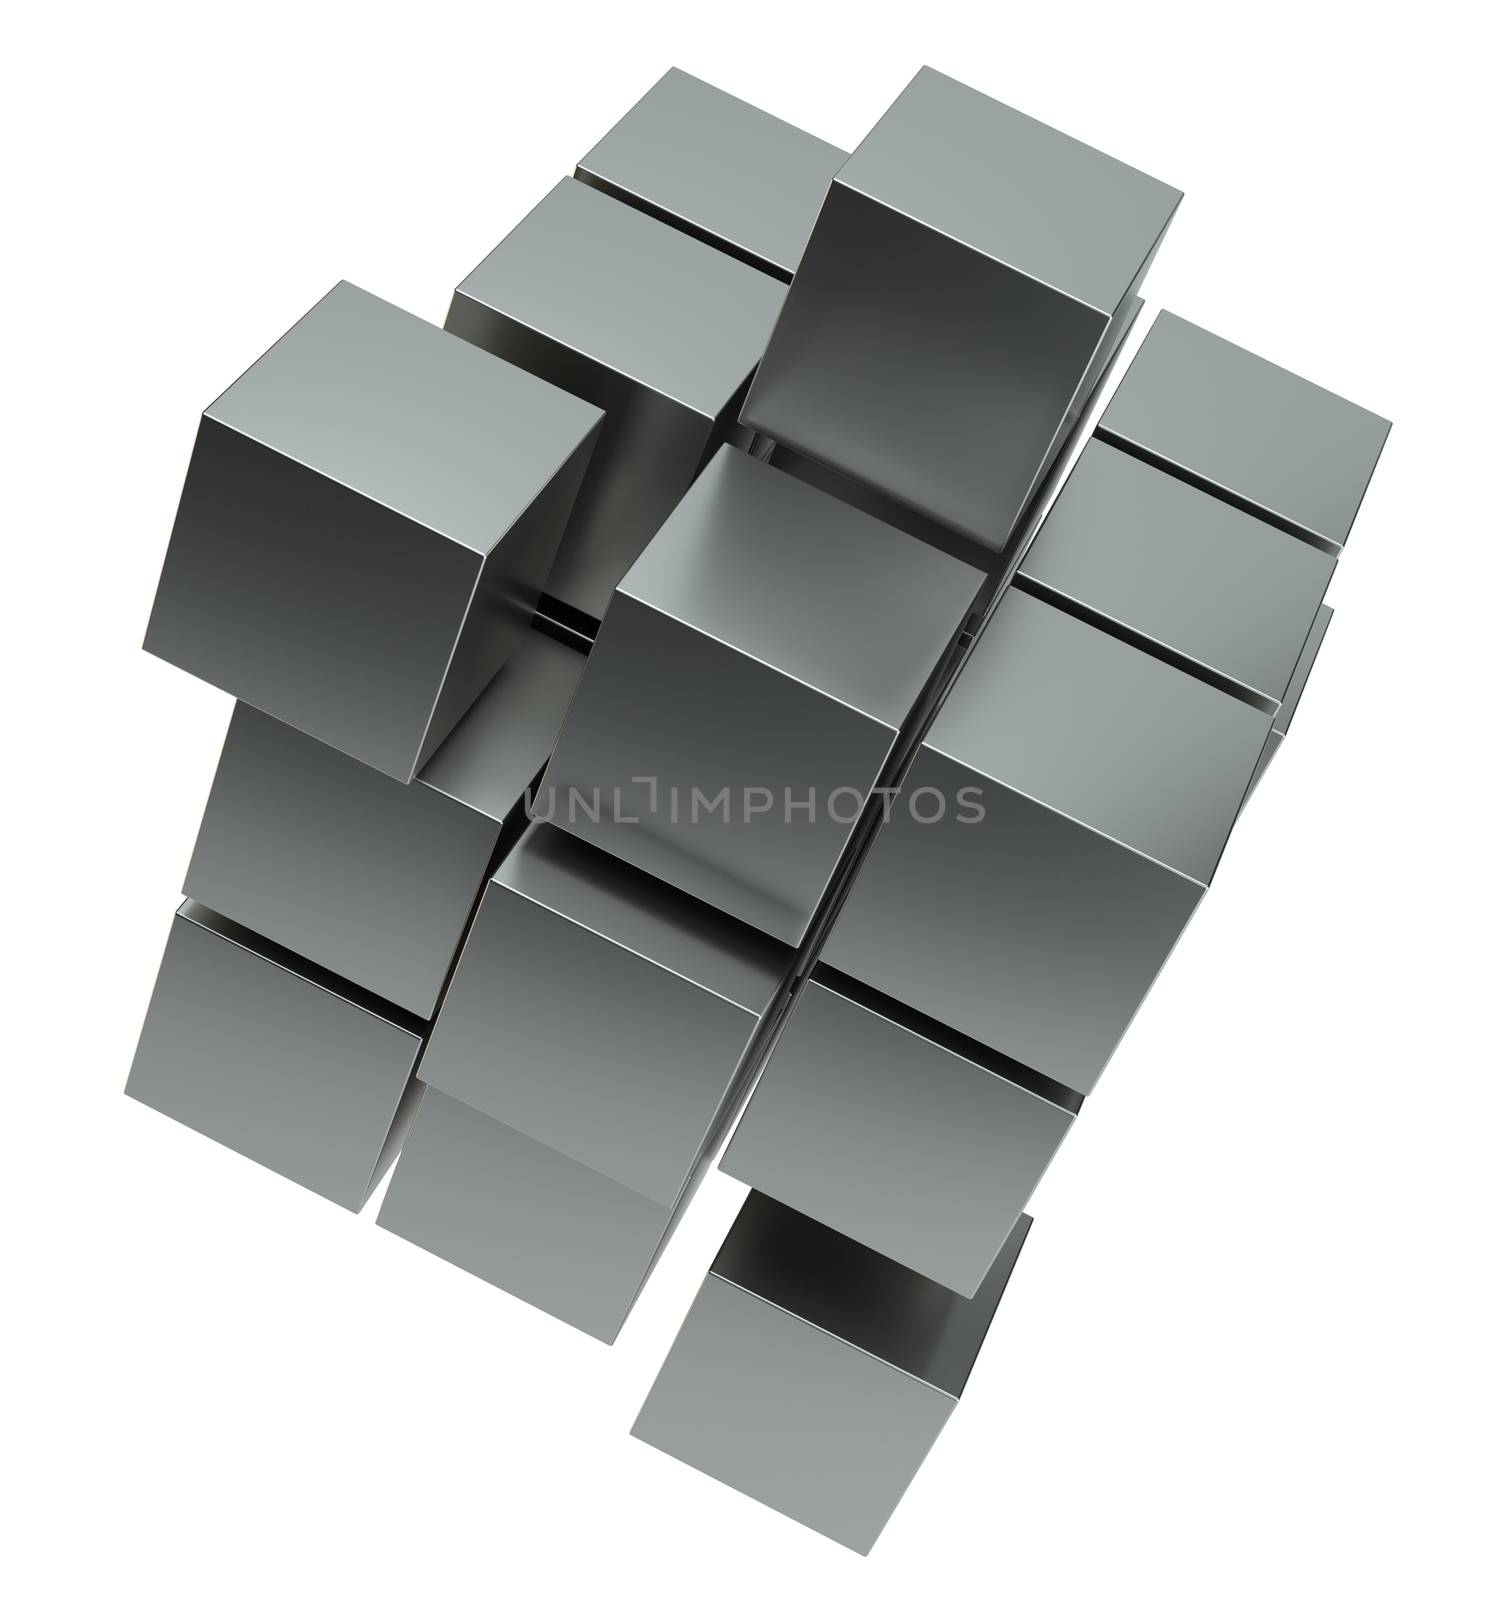 Abstract 3d illustration of cube assembling from blocks by cherezoff